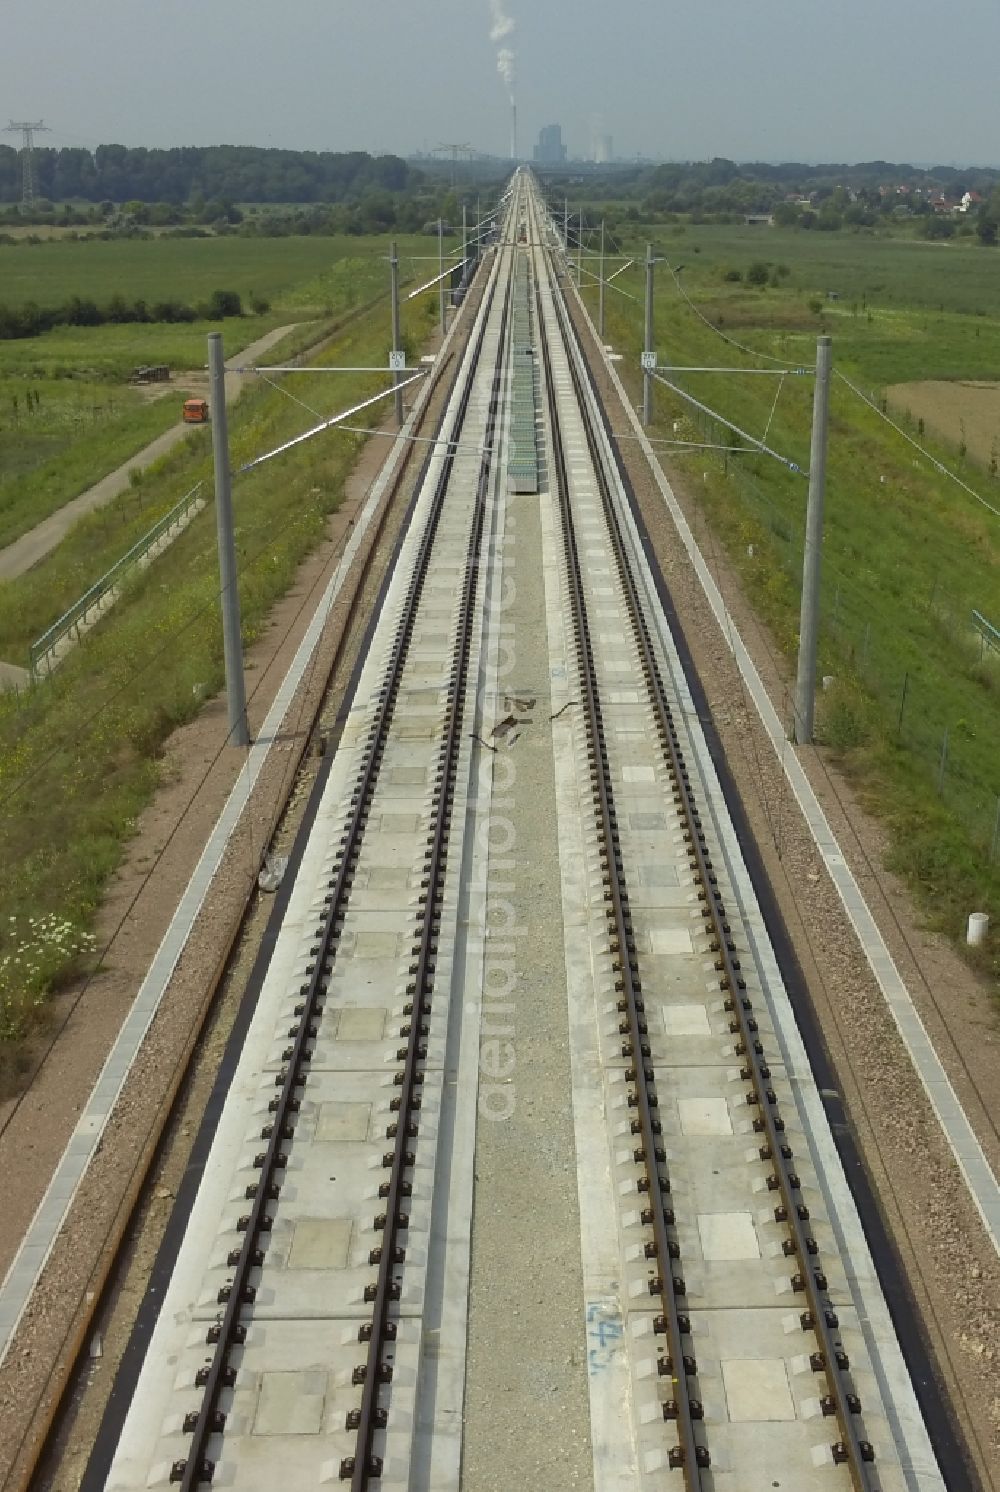 Lochau from the bird's eye view: Electrification work on the rail viaduct of the new ICE line operated by Deutsche Bahn in Lochau in Saxony-Anhalt